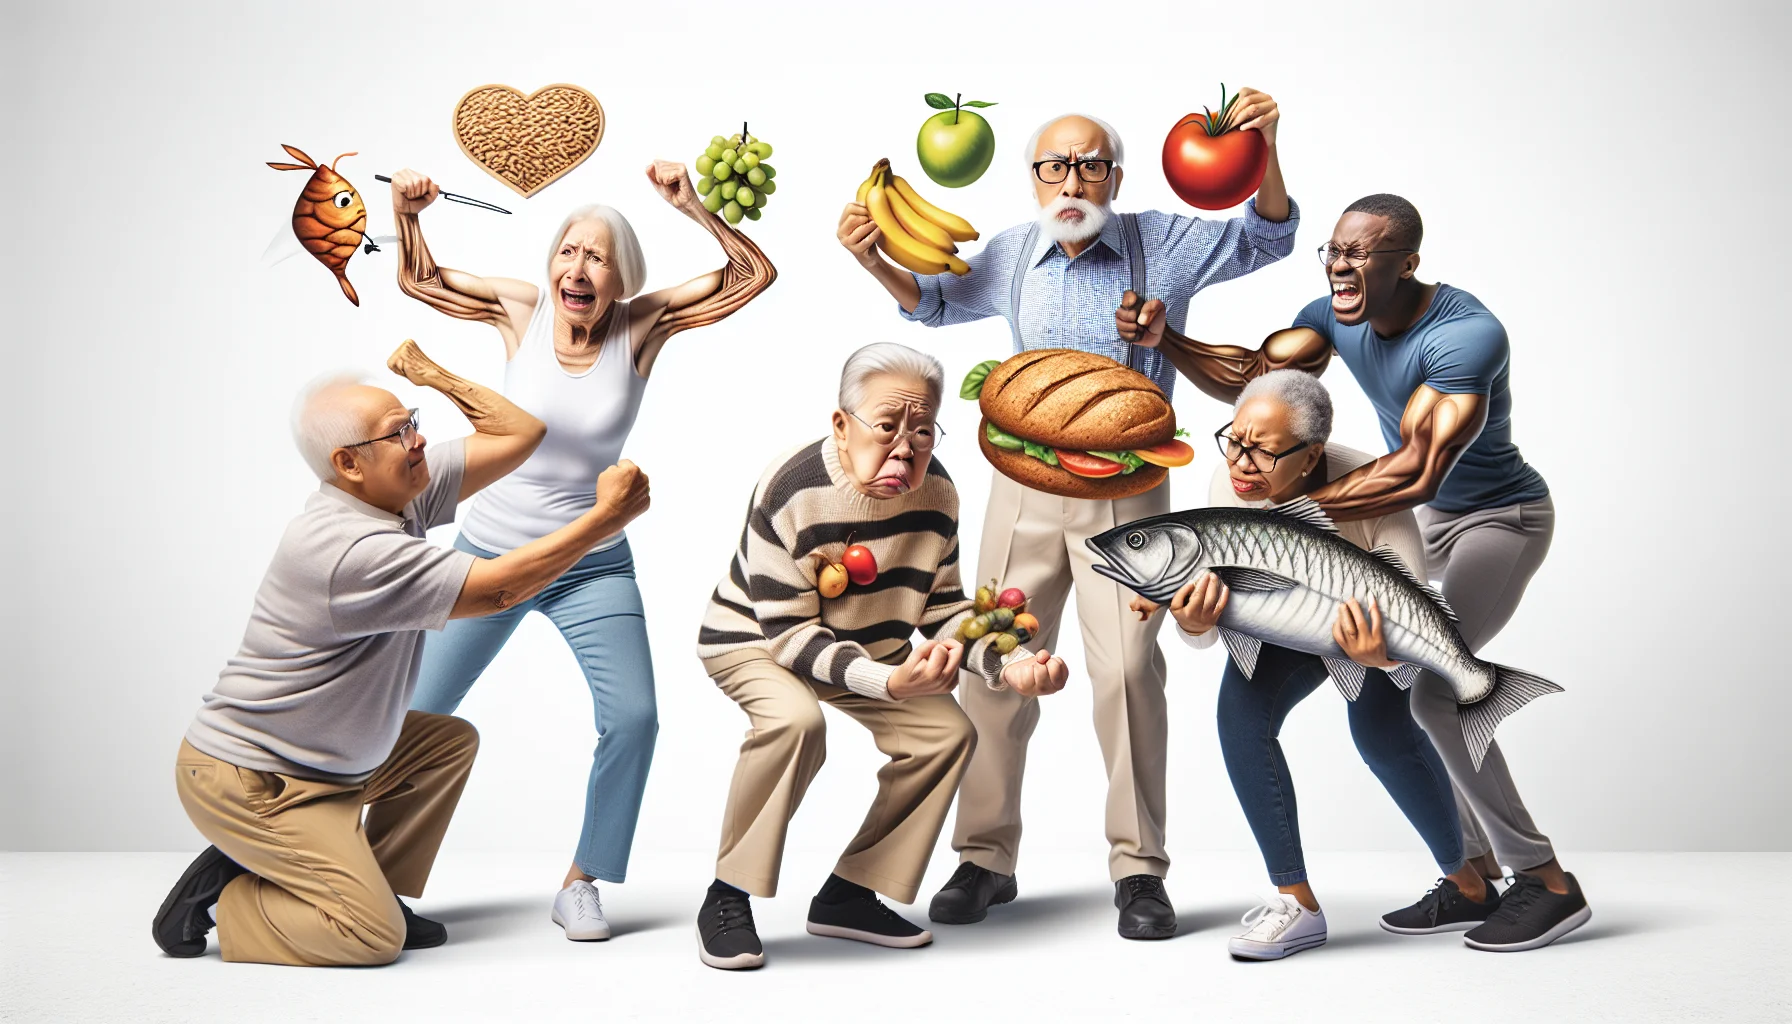 Create a humorous and realistic image referring to Boston and the science of nutrition. Depict three different types of healthy foods - perhaps fruits, whole grains, and fish. Show these in a funny situation with elderly people. Illustrate a diverse group of senior citizens - a Caucasian female, an Asian male, and a Black couple - each humorously struggling with different aspects of a healthy diet. For example, the woman could be juggling fruits, the Asian man unsuccessfully trying to catch a fish with his bare hands, and the Black couple playfully fighting over a loaf of whole grain bread.